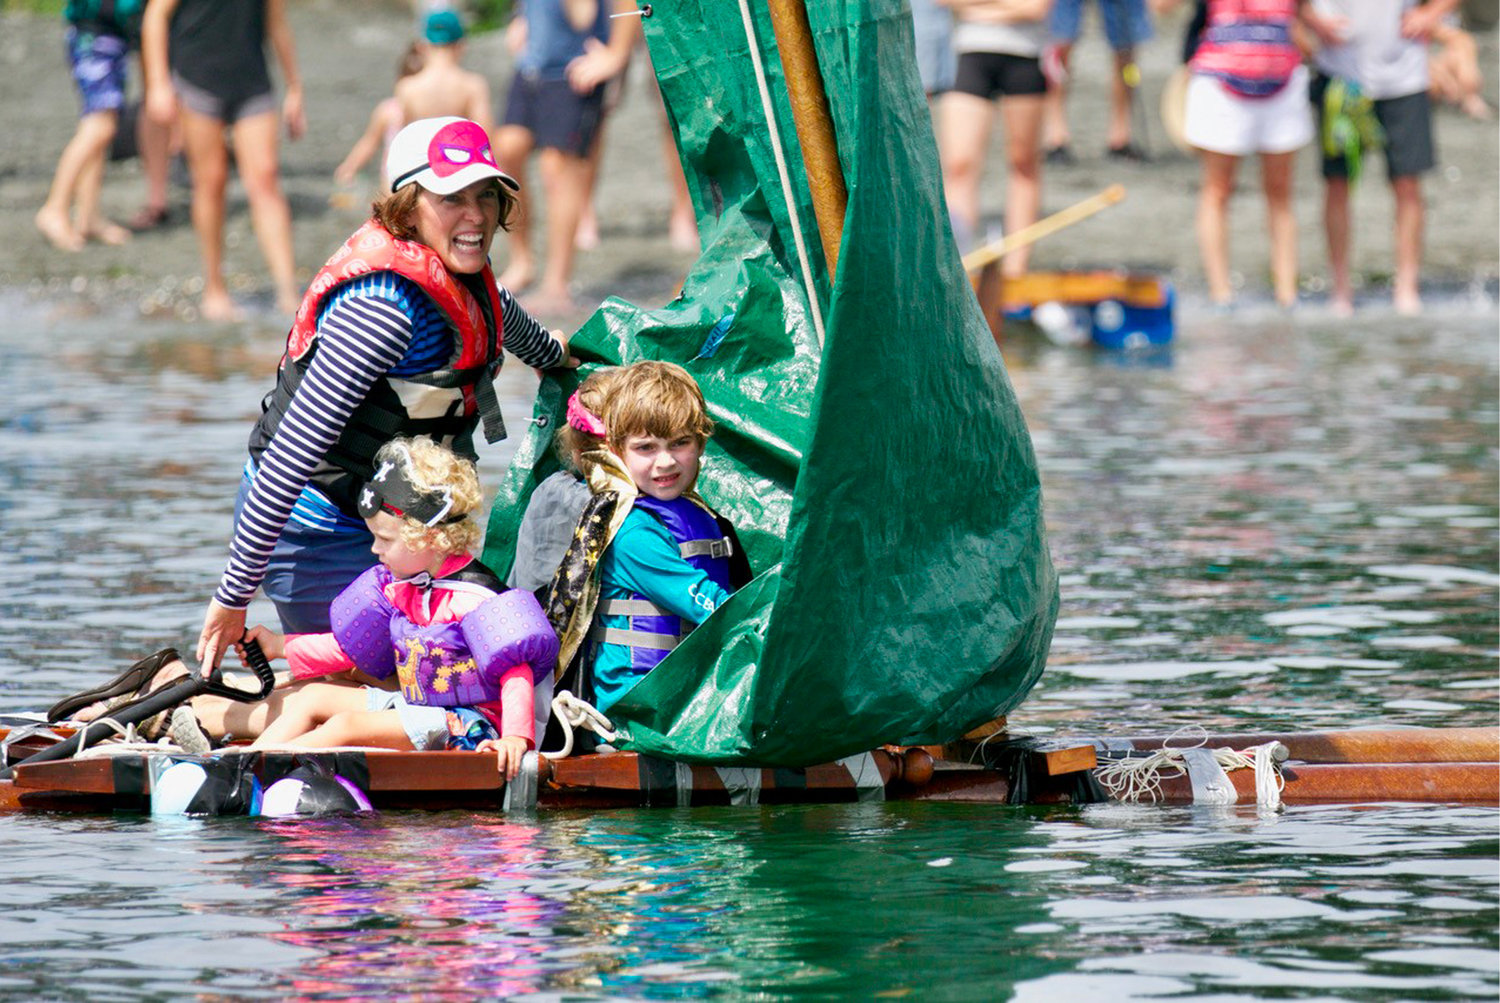 Participants sink or swim aboard their crafty vessels for the Fools’ Rules Regatta